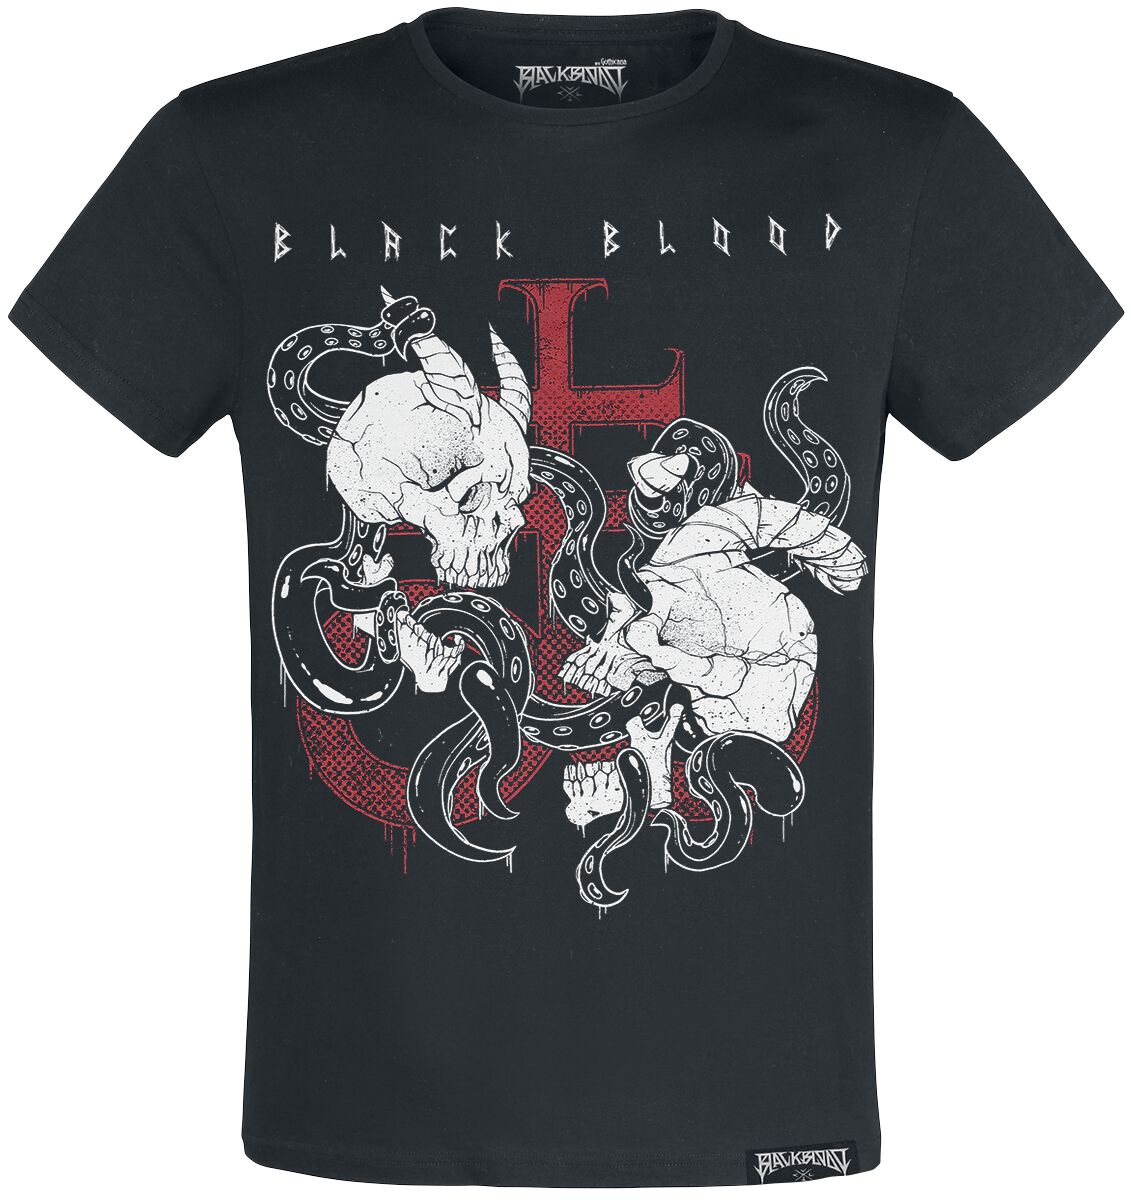 Black Blood by Gothicana T-Shirt with Demon Skull Print T-Shirt schwarz in S